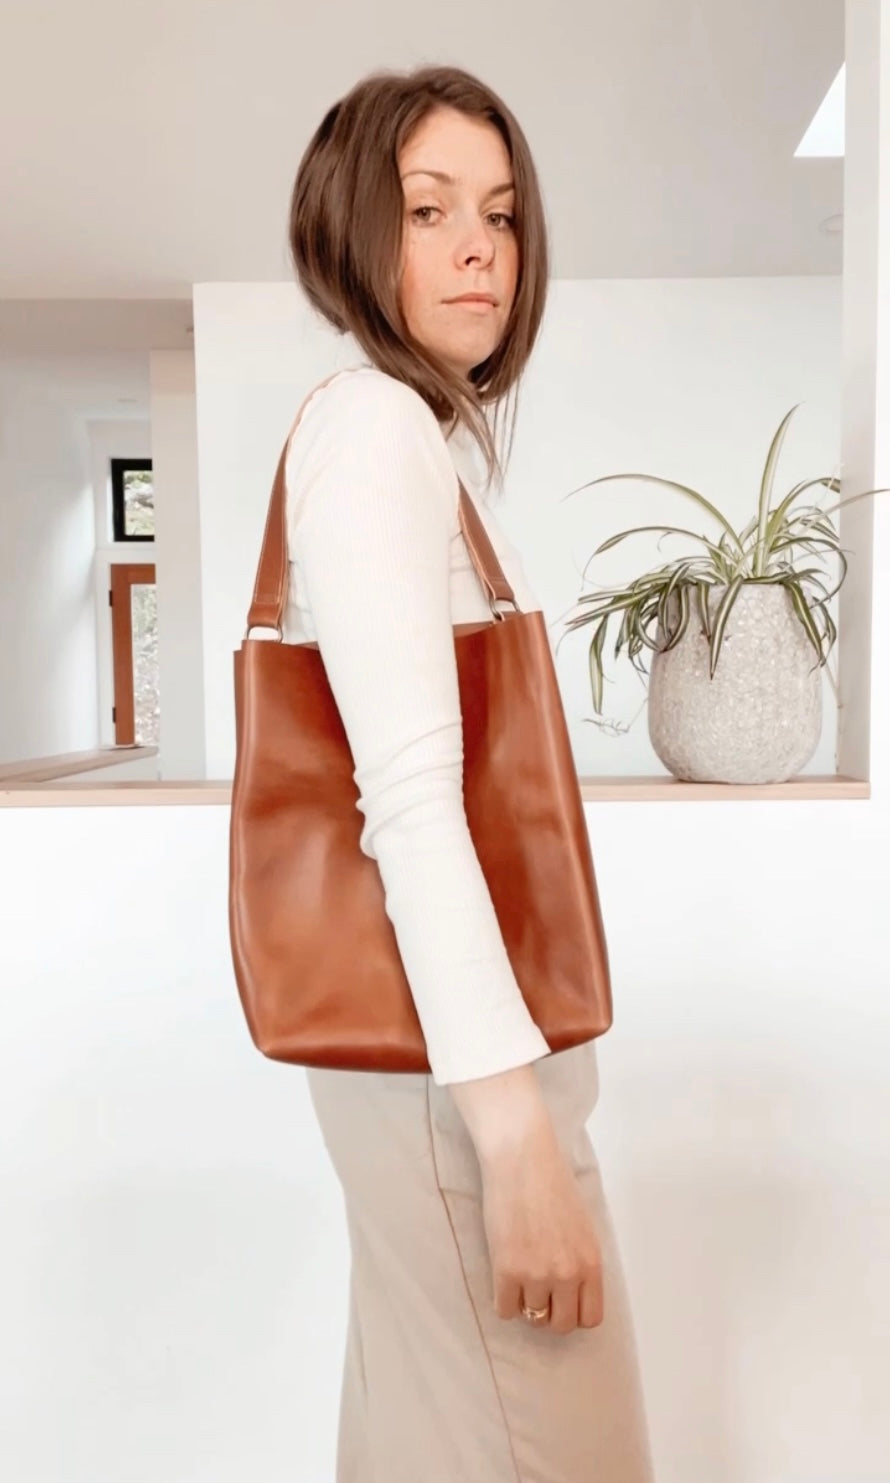 Lady Bag in Cognac Leather Bag - handcrafted by Market Canvas Leather in Tofino, BC, Canada